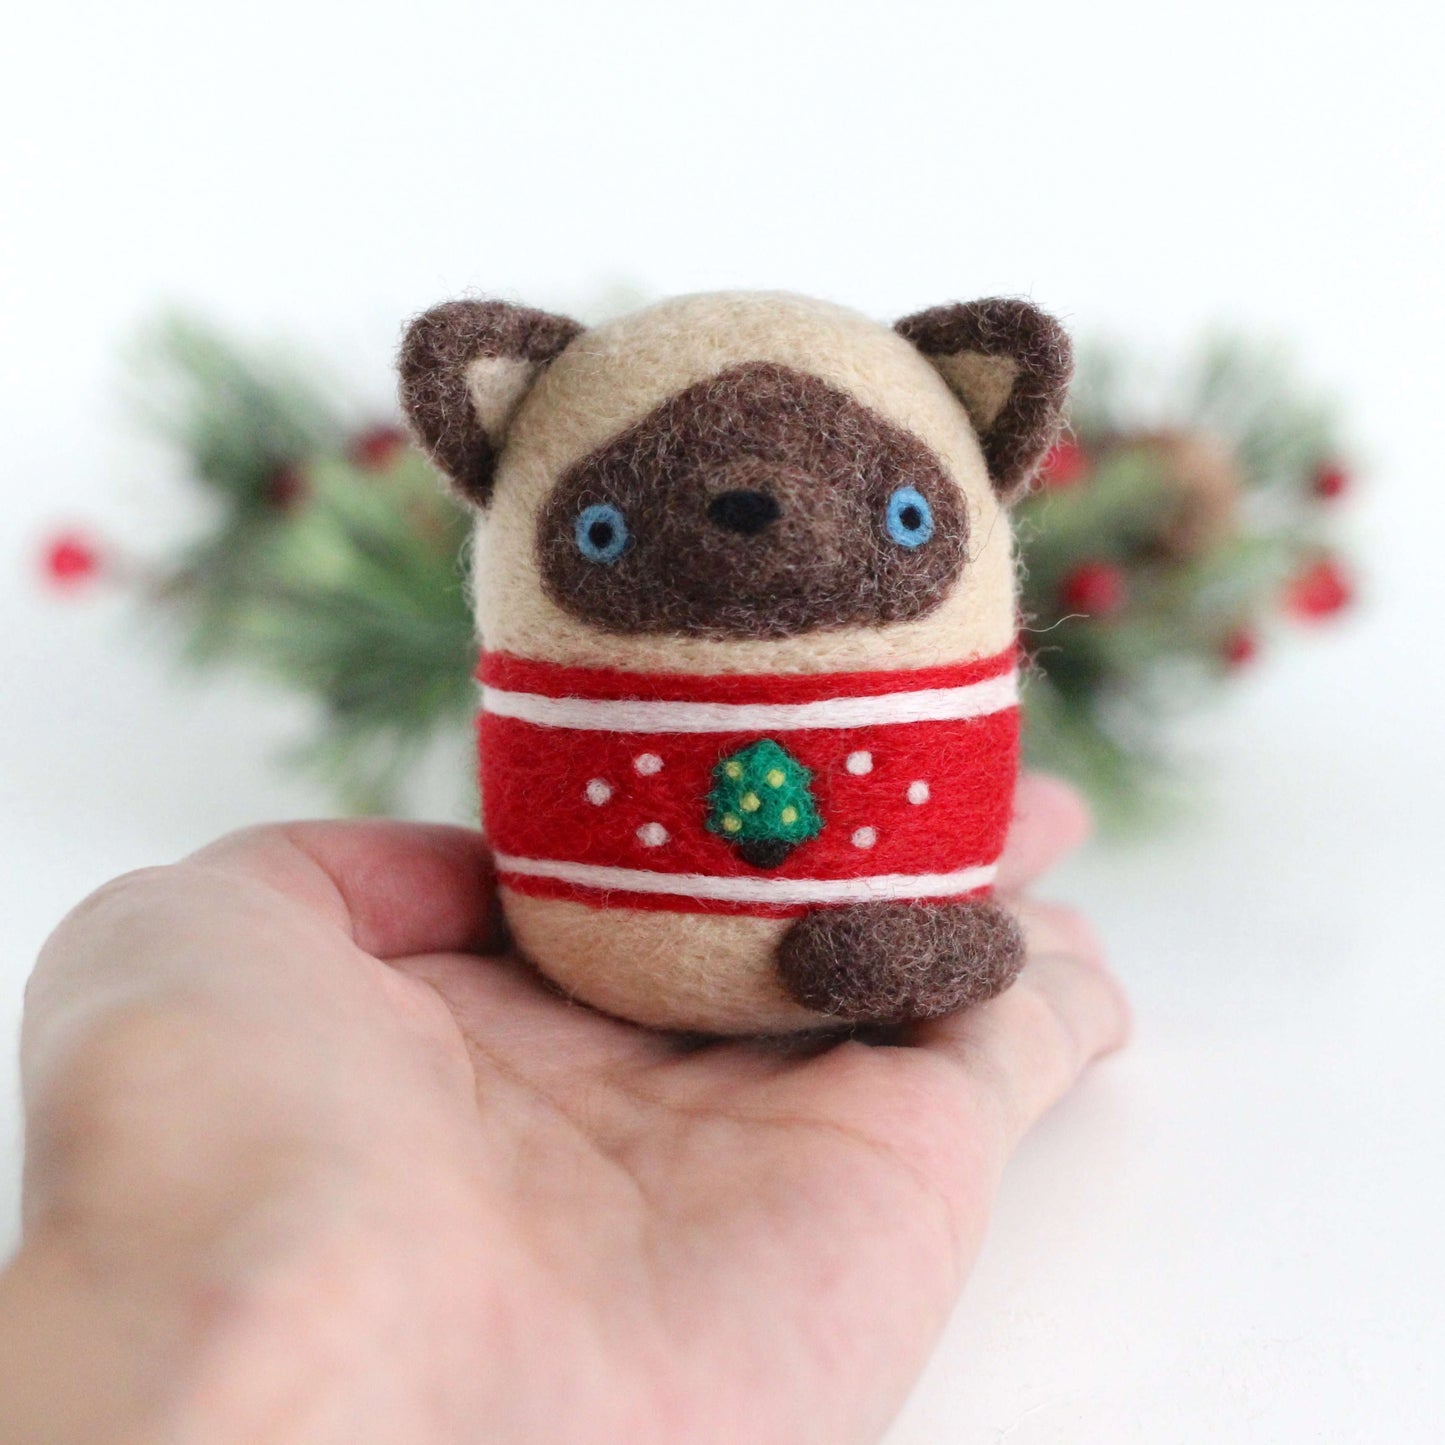 Needle Felted Siamese Cat in Christmas Tree Sweater by Wild Whimsy Woolies